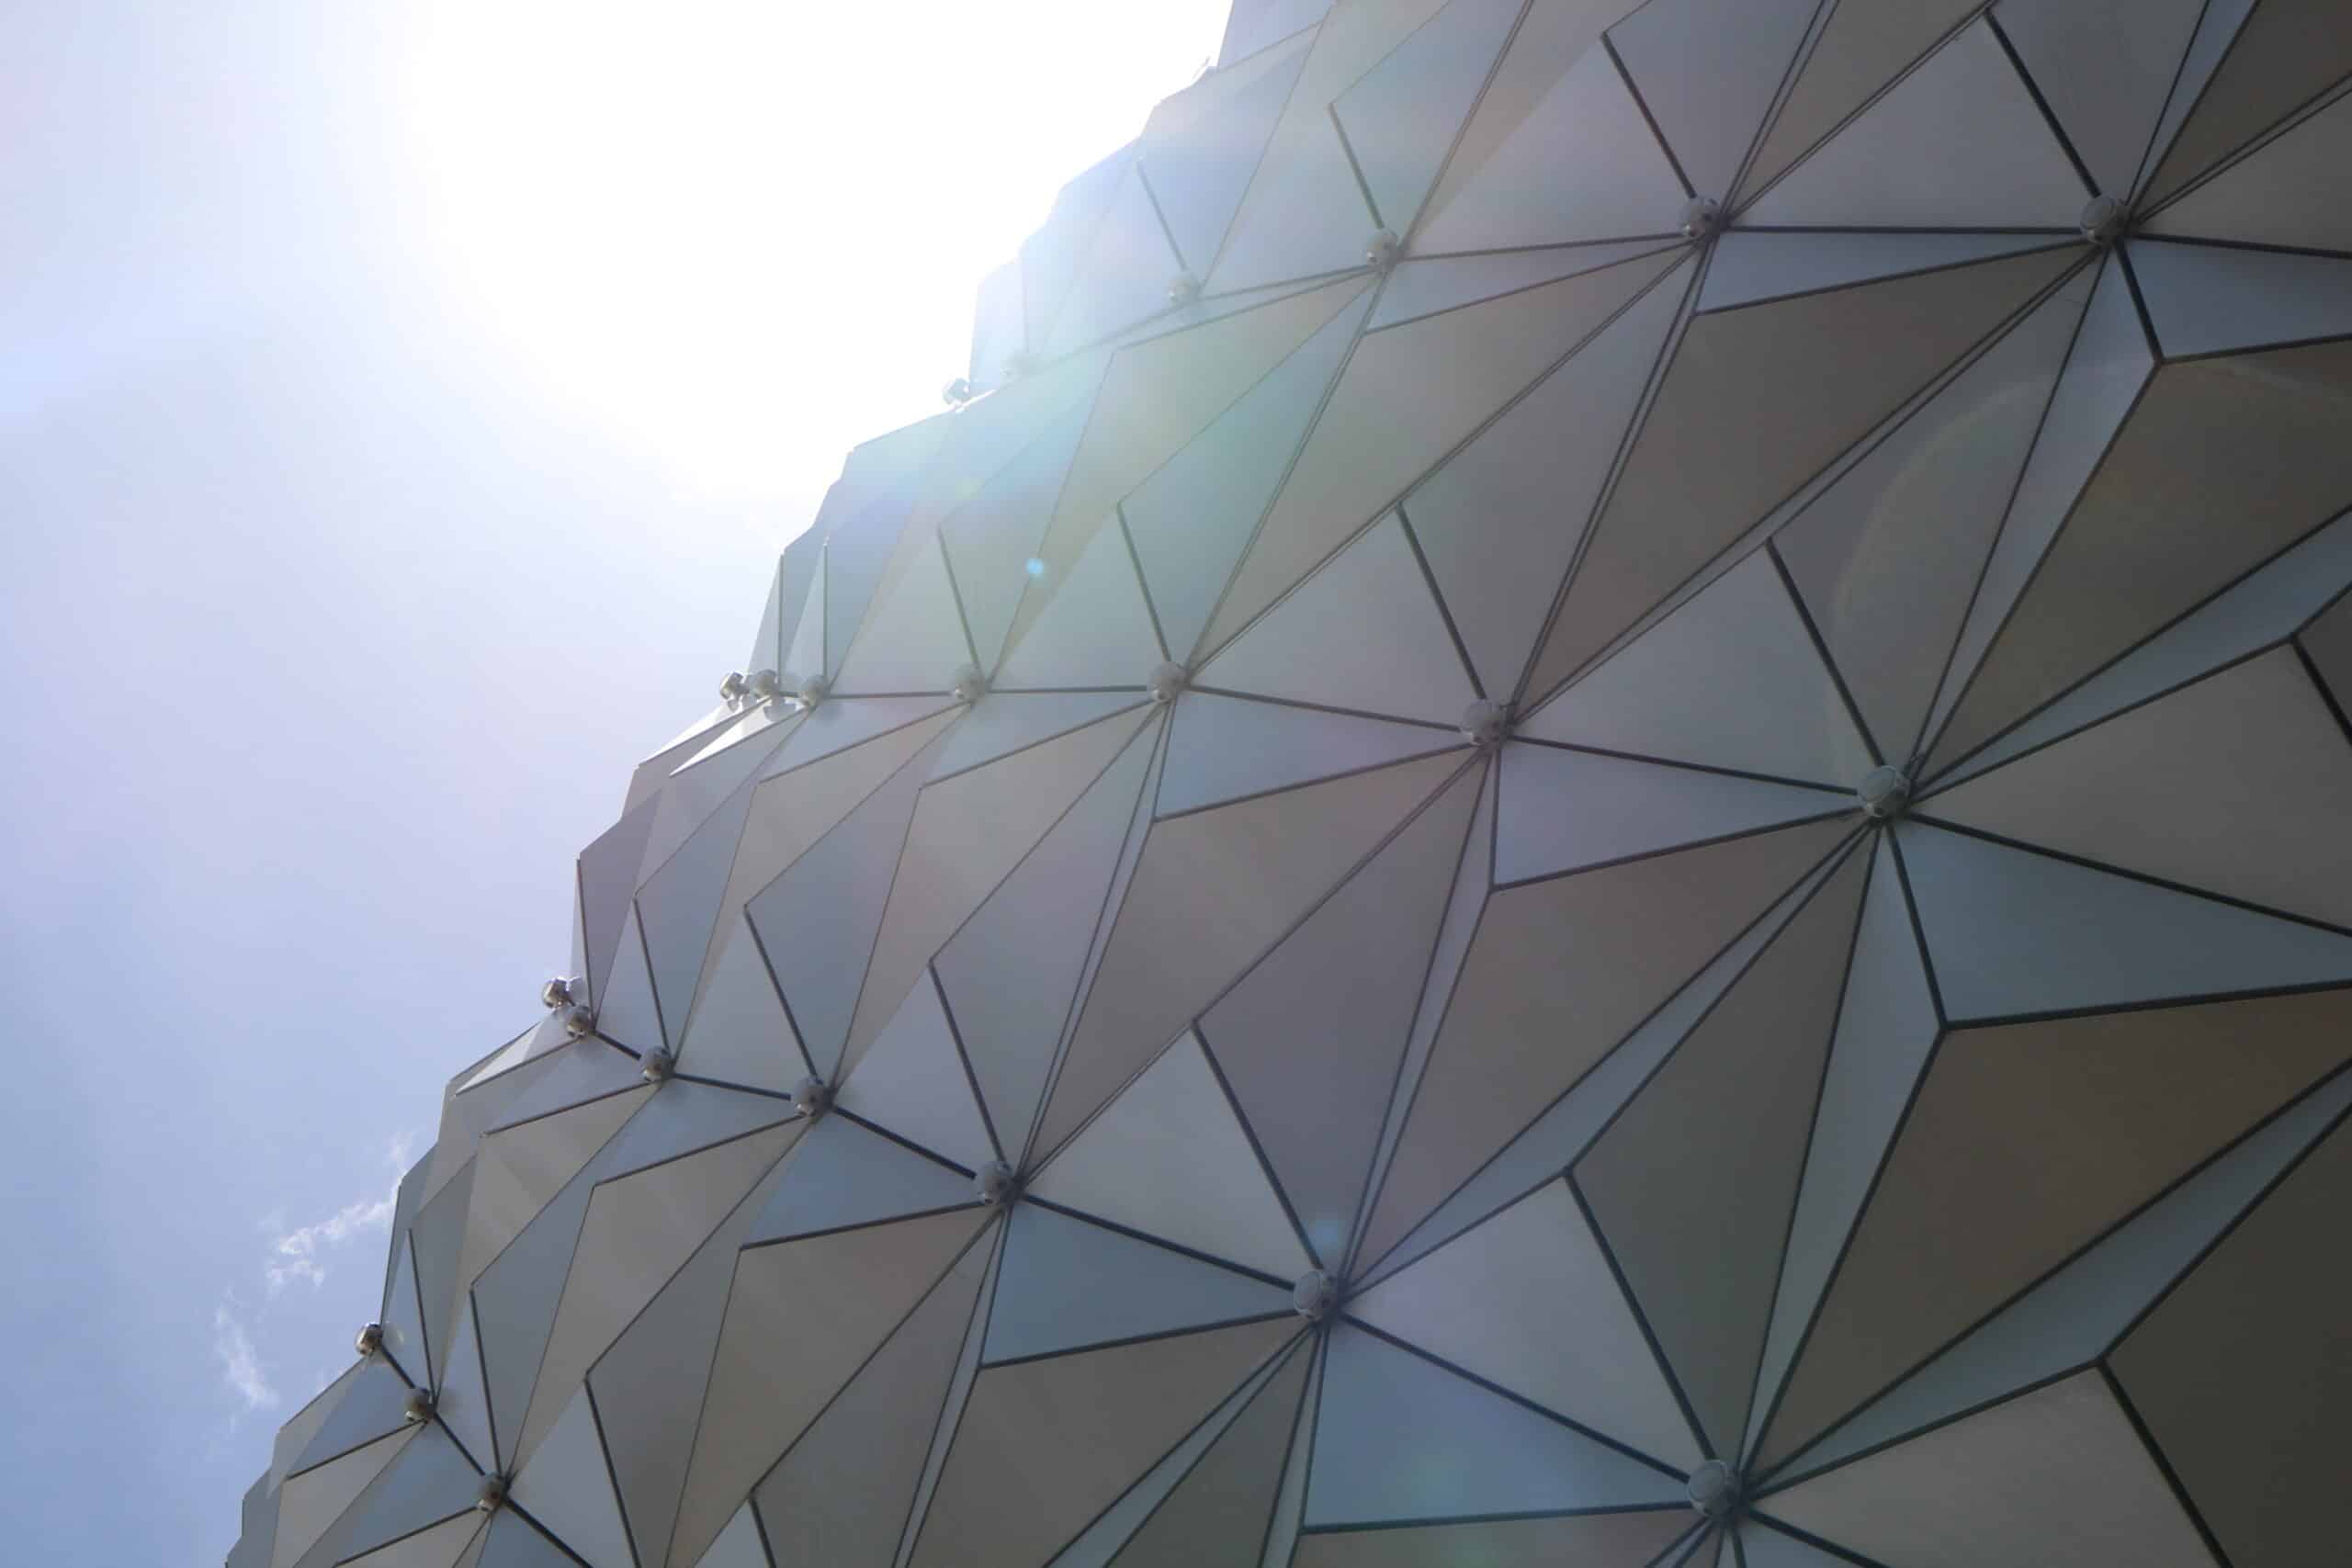 spaceship earth close up with sun shining overhead